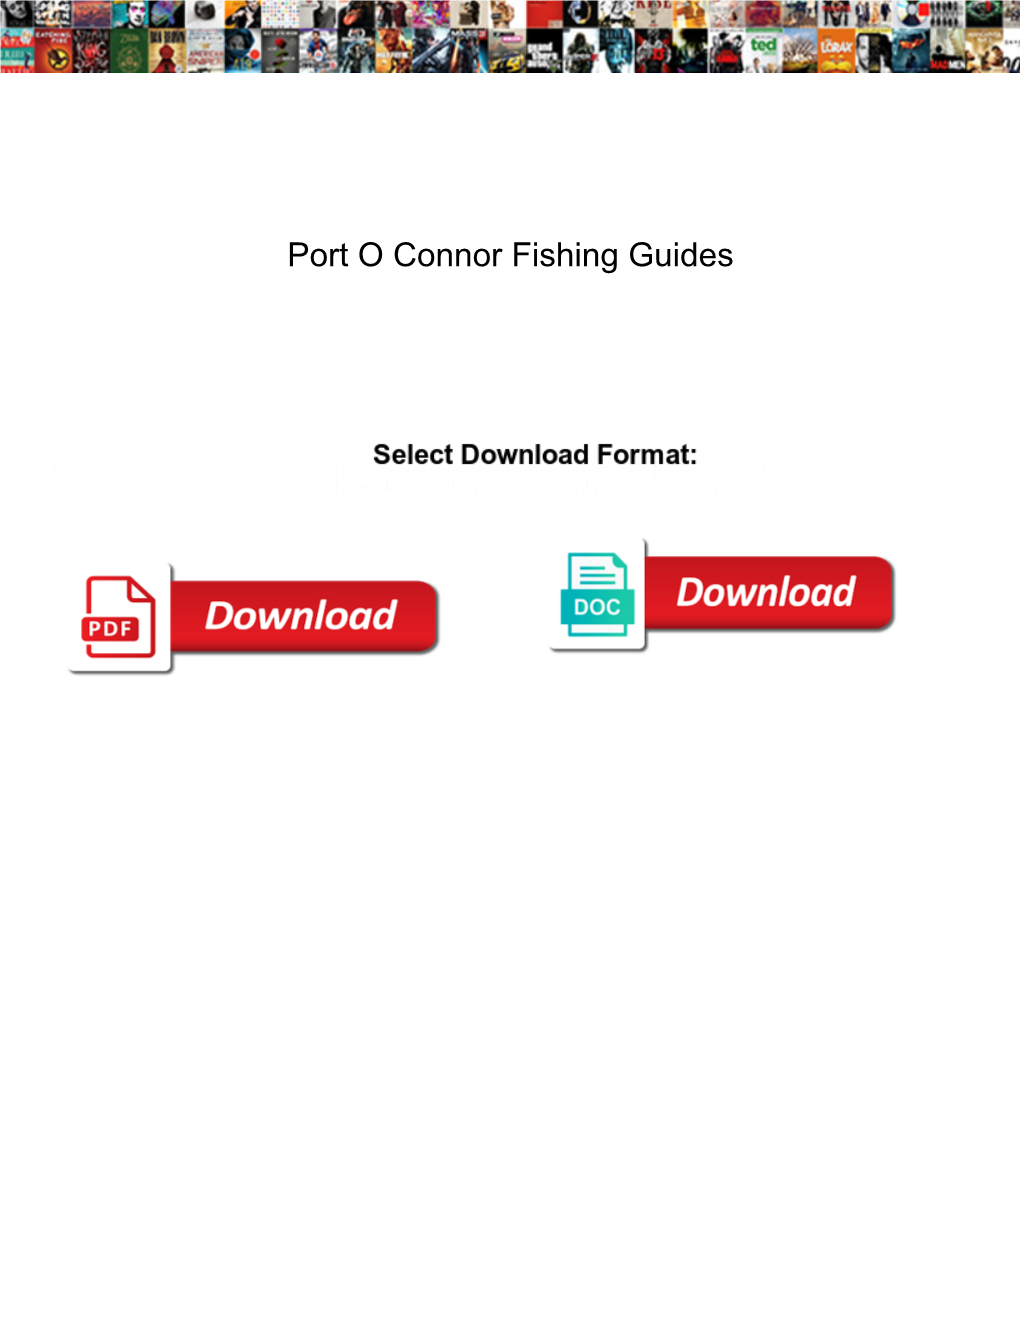 Port O Connor Fishing Guides